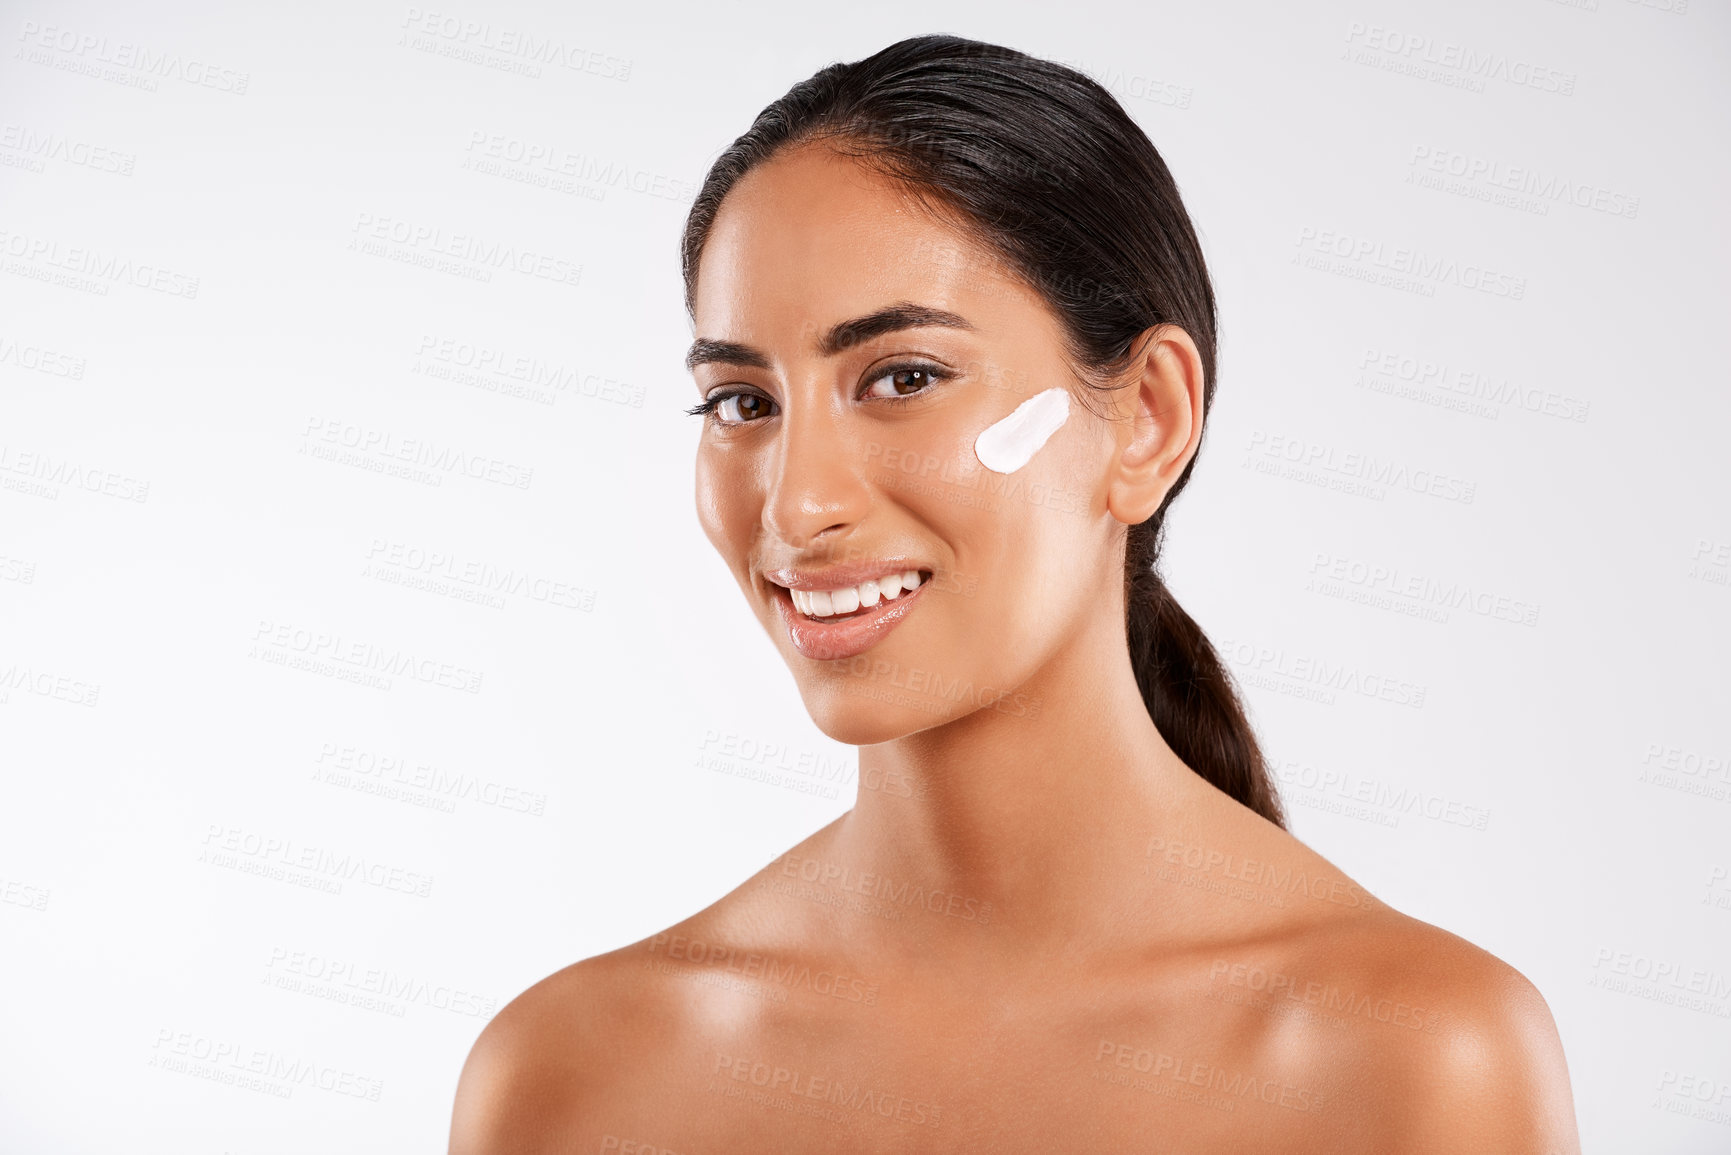 Buy stock photo Studio portrait of a beautiful young woman posing with lotion on her face against a gray background